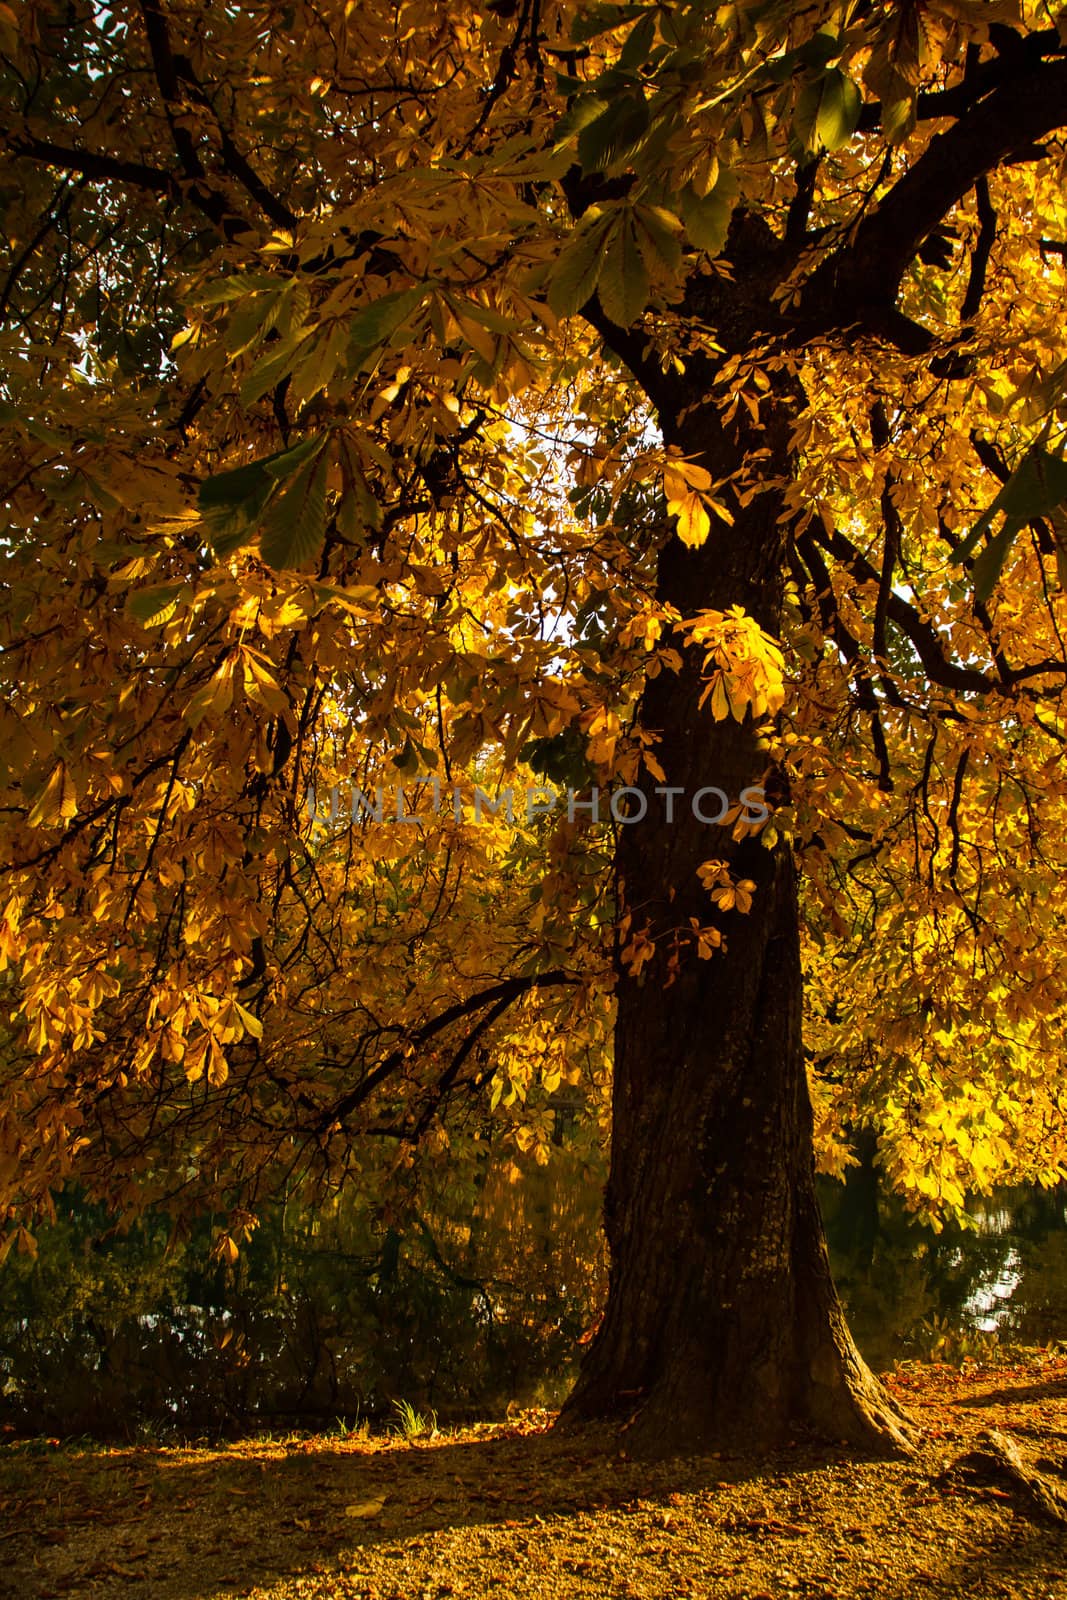 One beautiful tree in the autumn landscape by NagyDodo